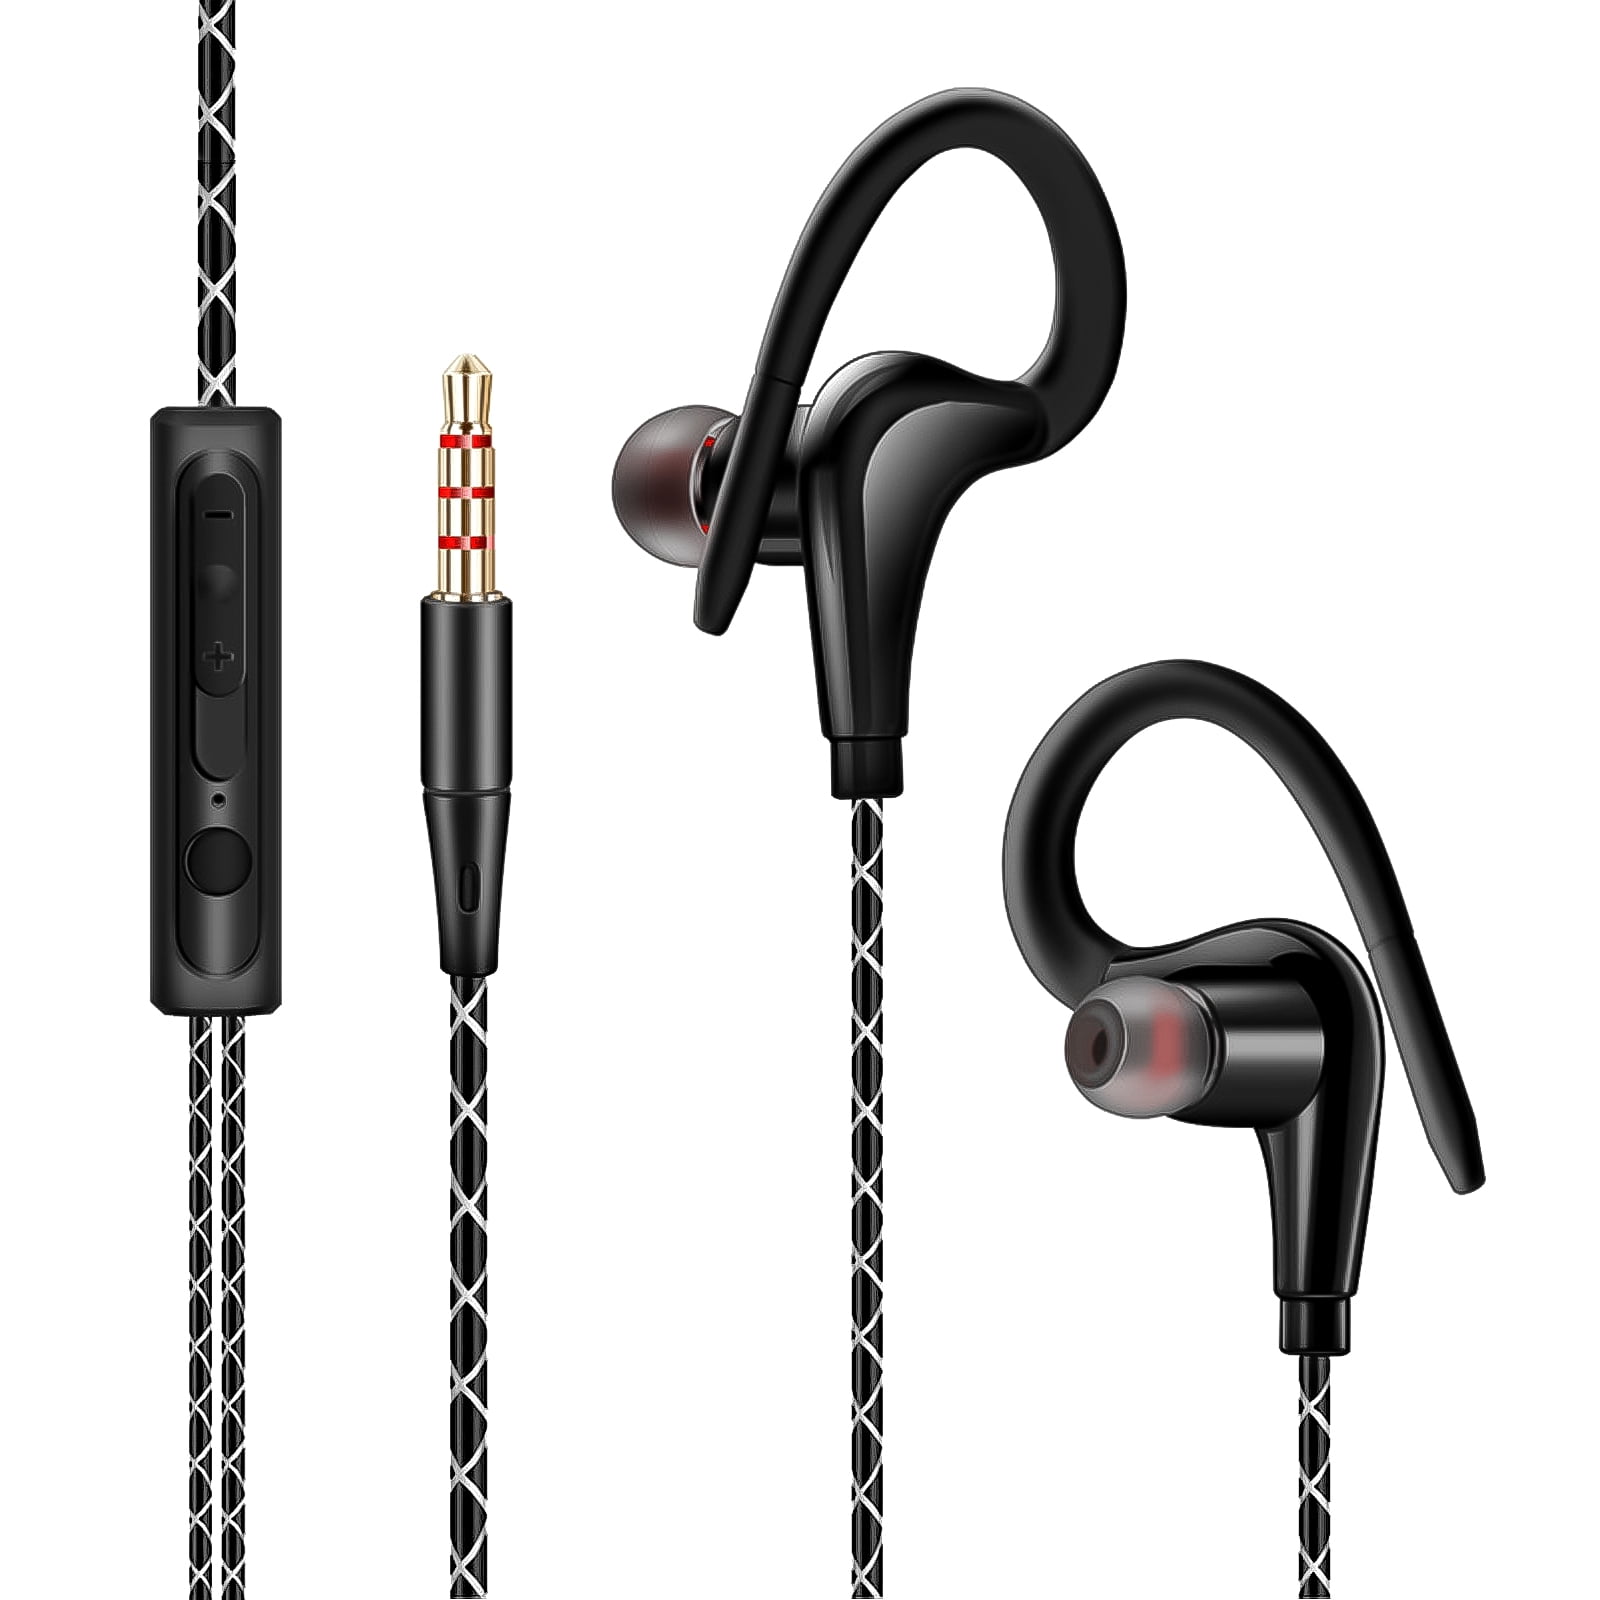 Sport Earbuds with Mic and Waterproof Capability